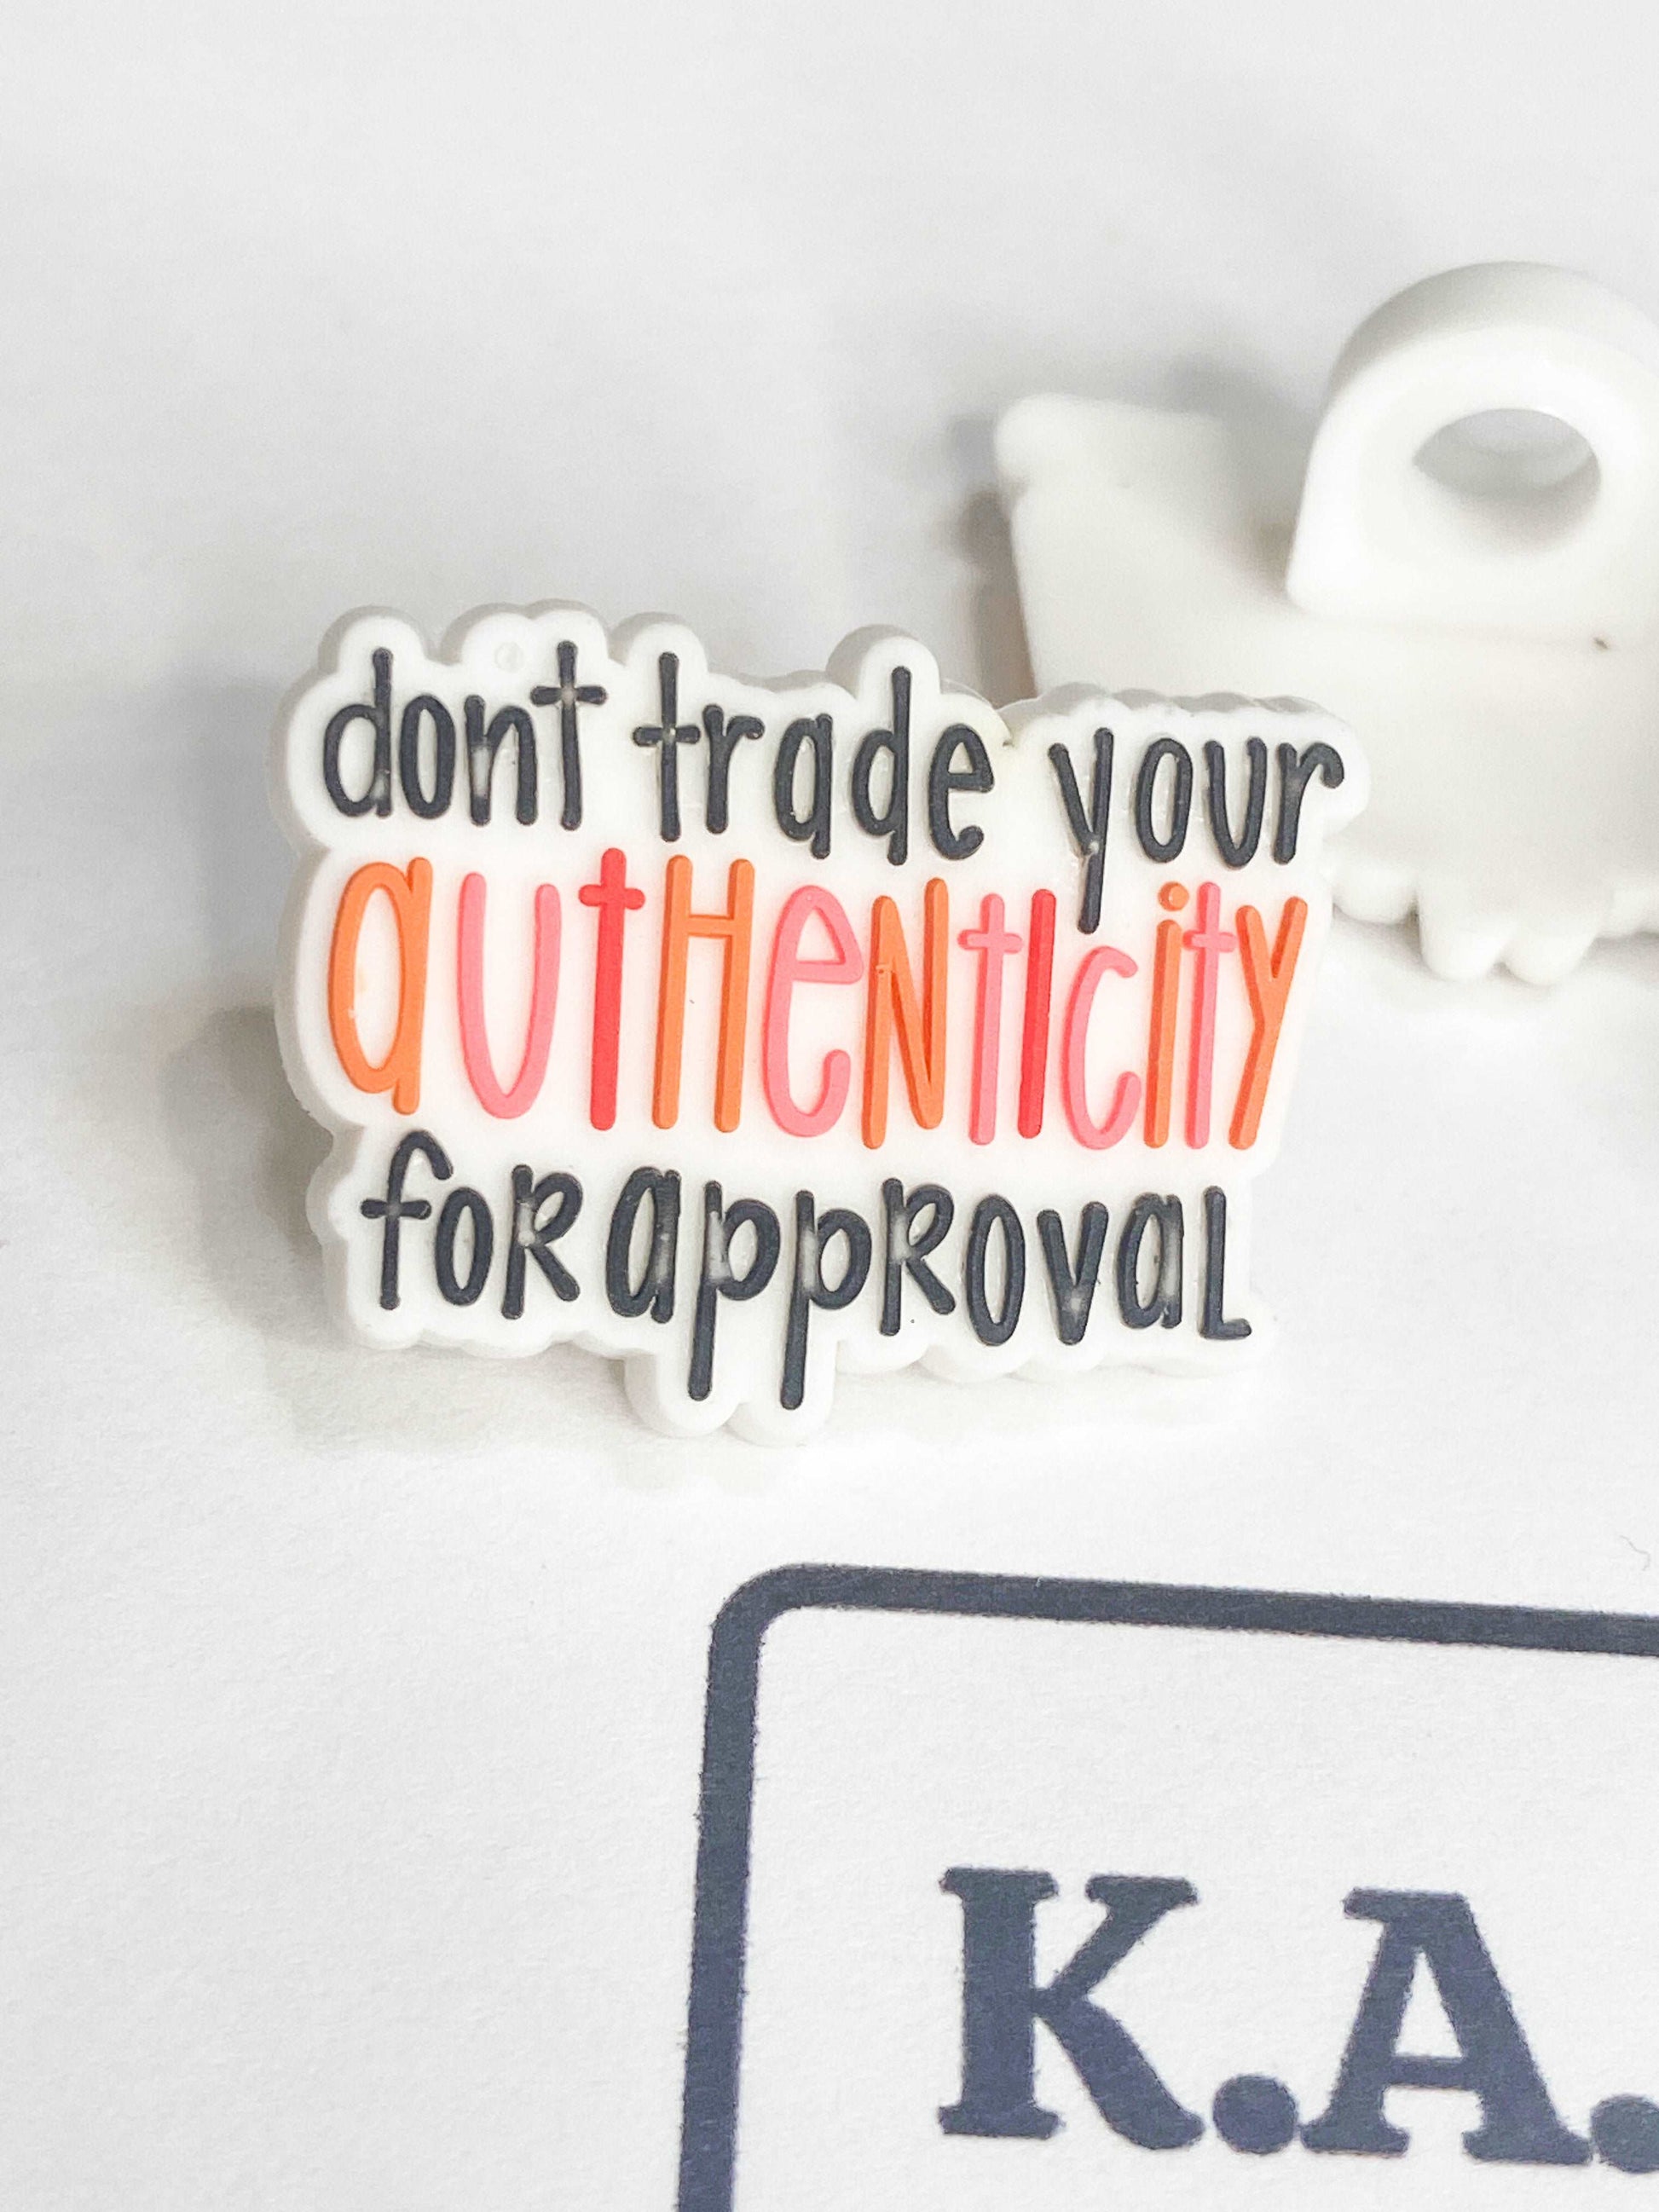 Don’t trade your authenticity